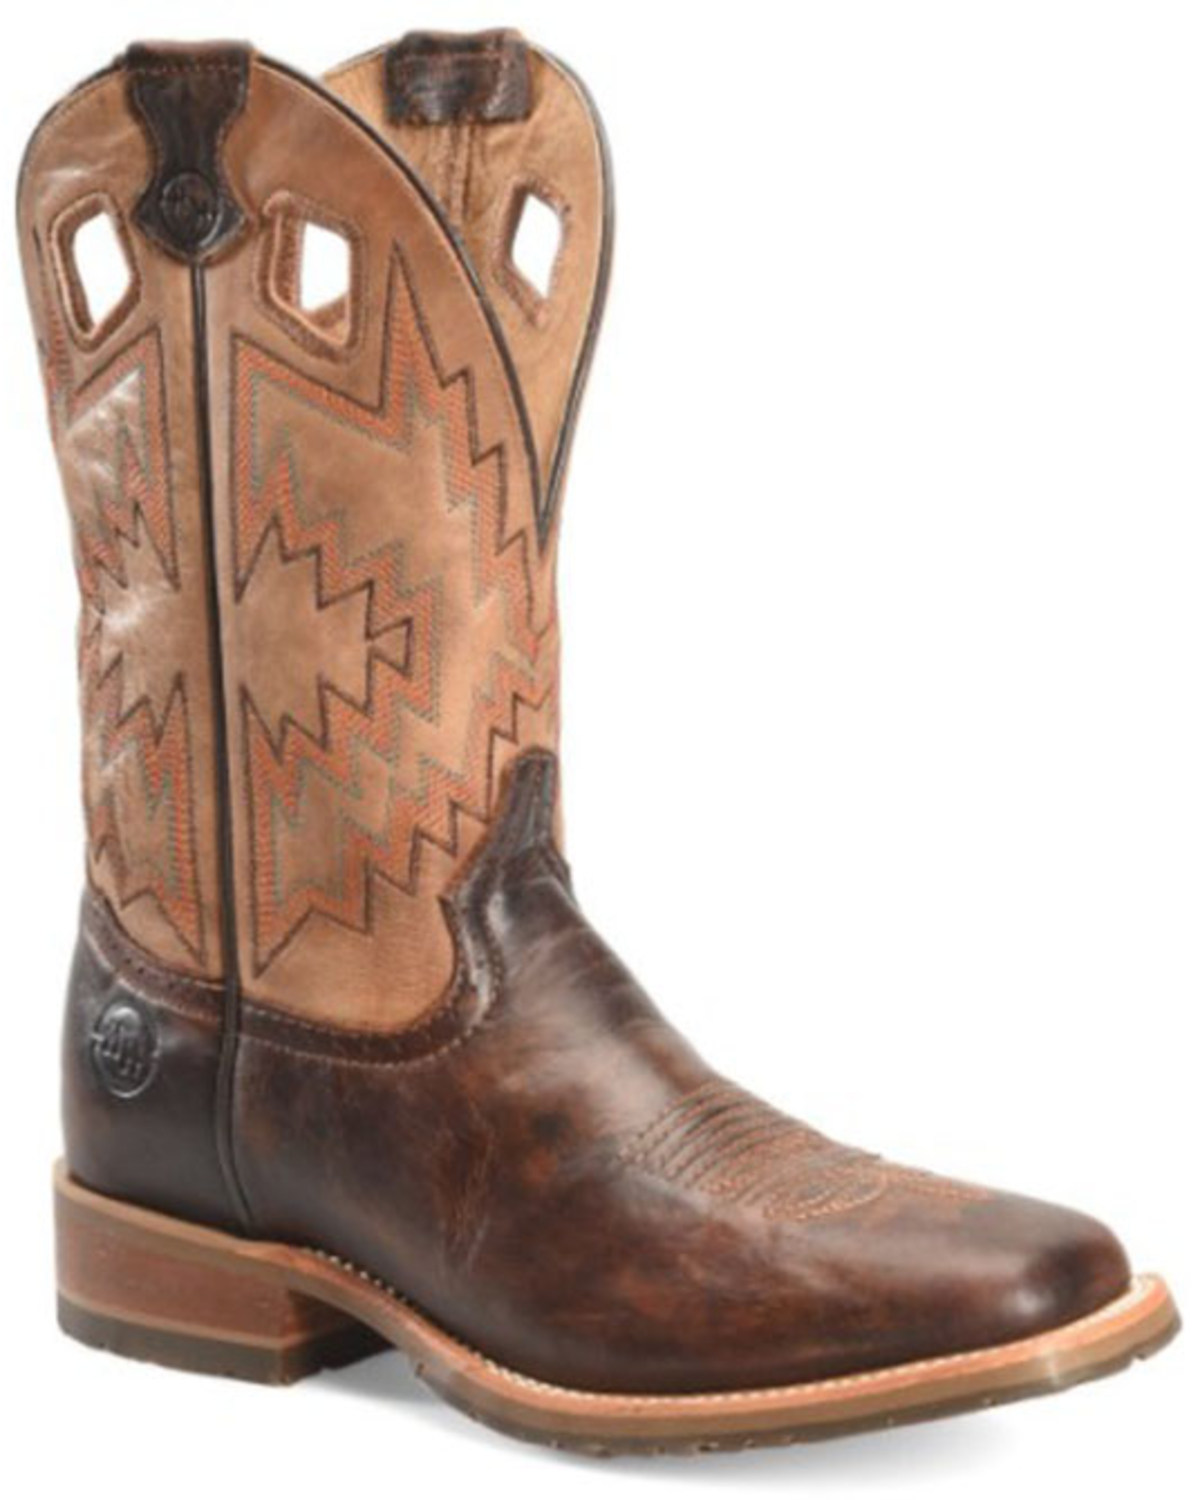 Double H Men's Winston Western Boots - Broad Square Toe